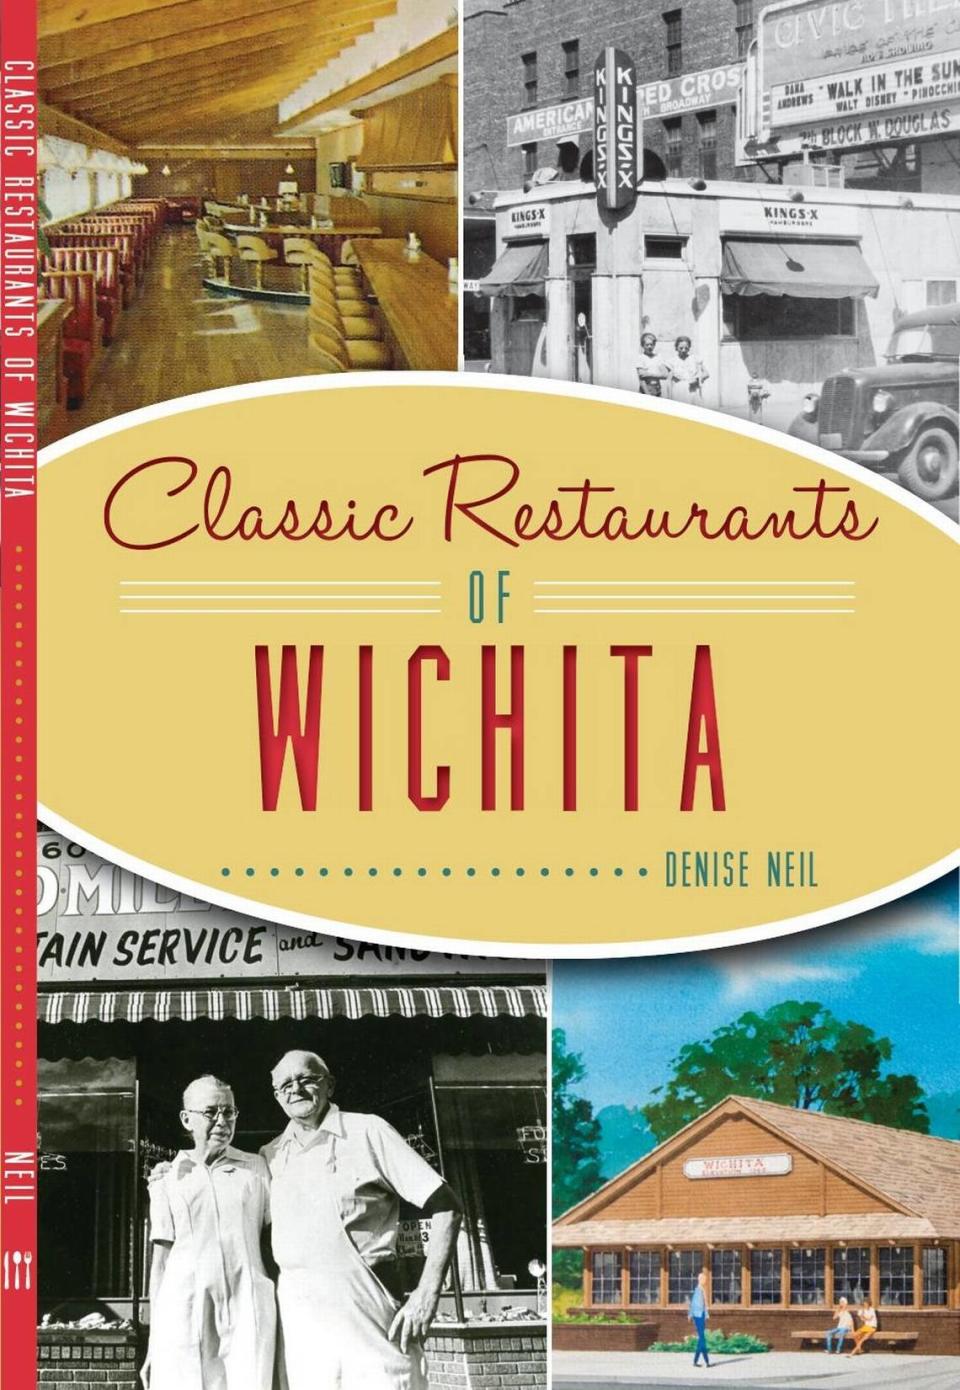 Denise Neil will be signing copies of her book “Classic Restaurants of Wichita” from 11 a.m. to 1 p.m. Saturday, Dec. 4, at the Jimmie’s Diner on North Rock Road.